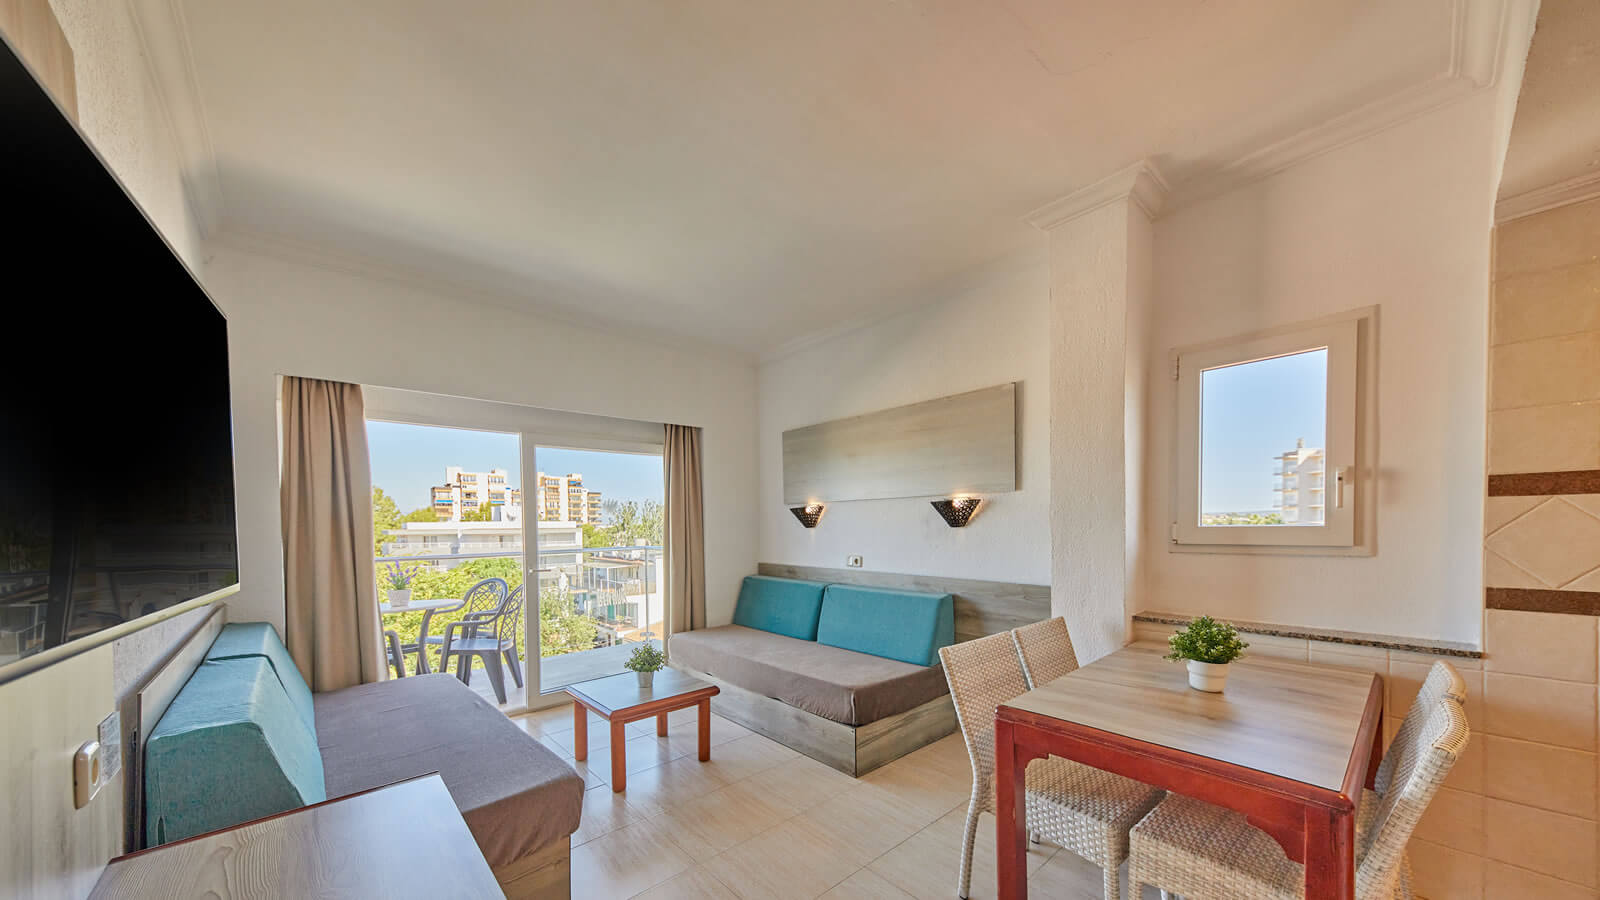 2 bedroom apartment with pool view ben hur